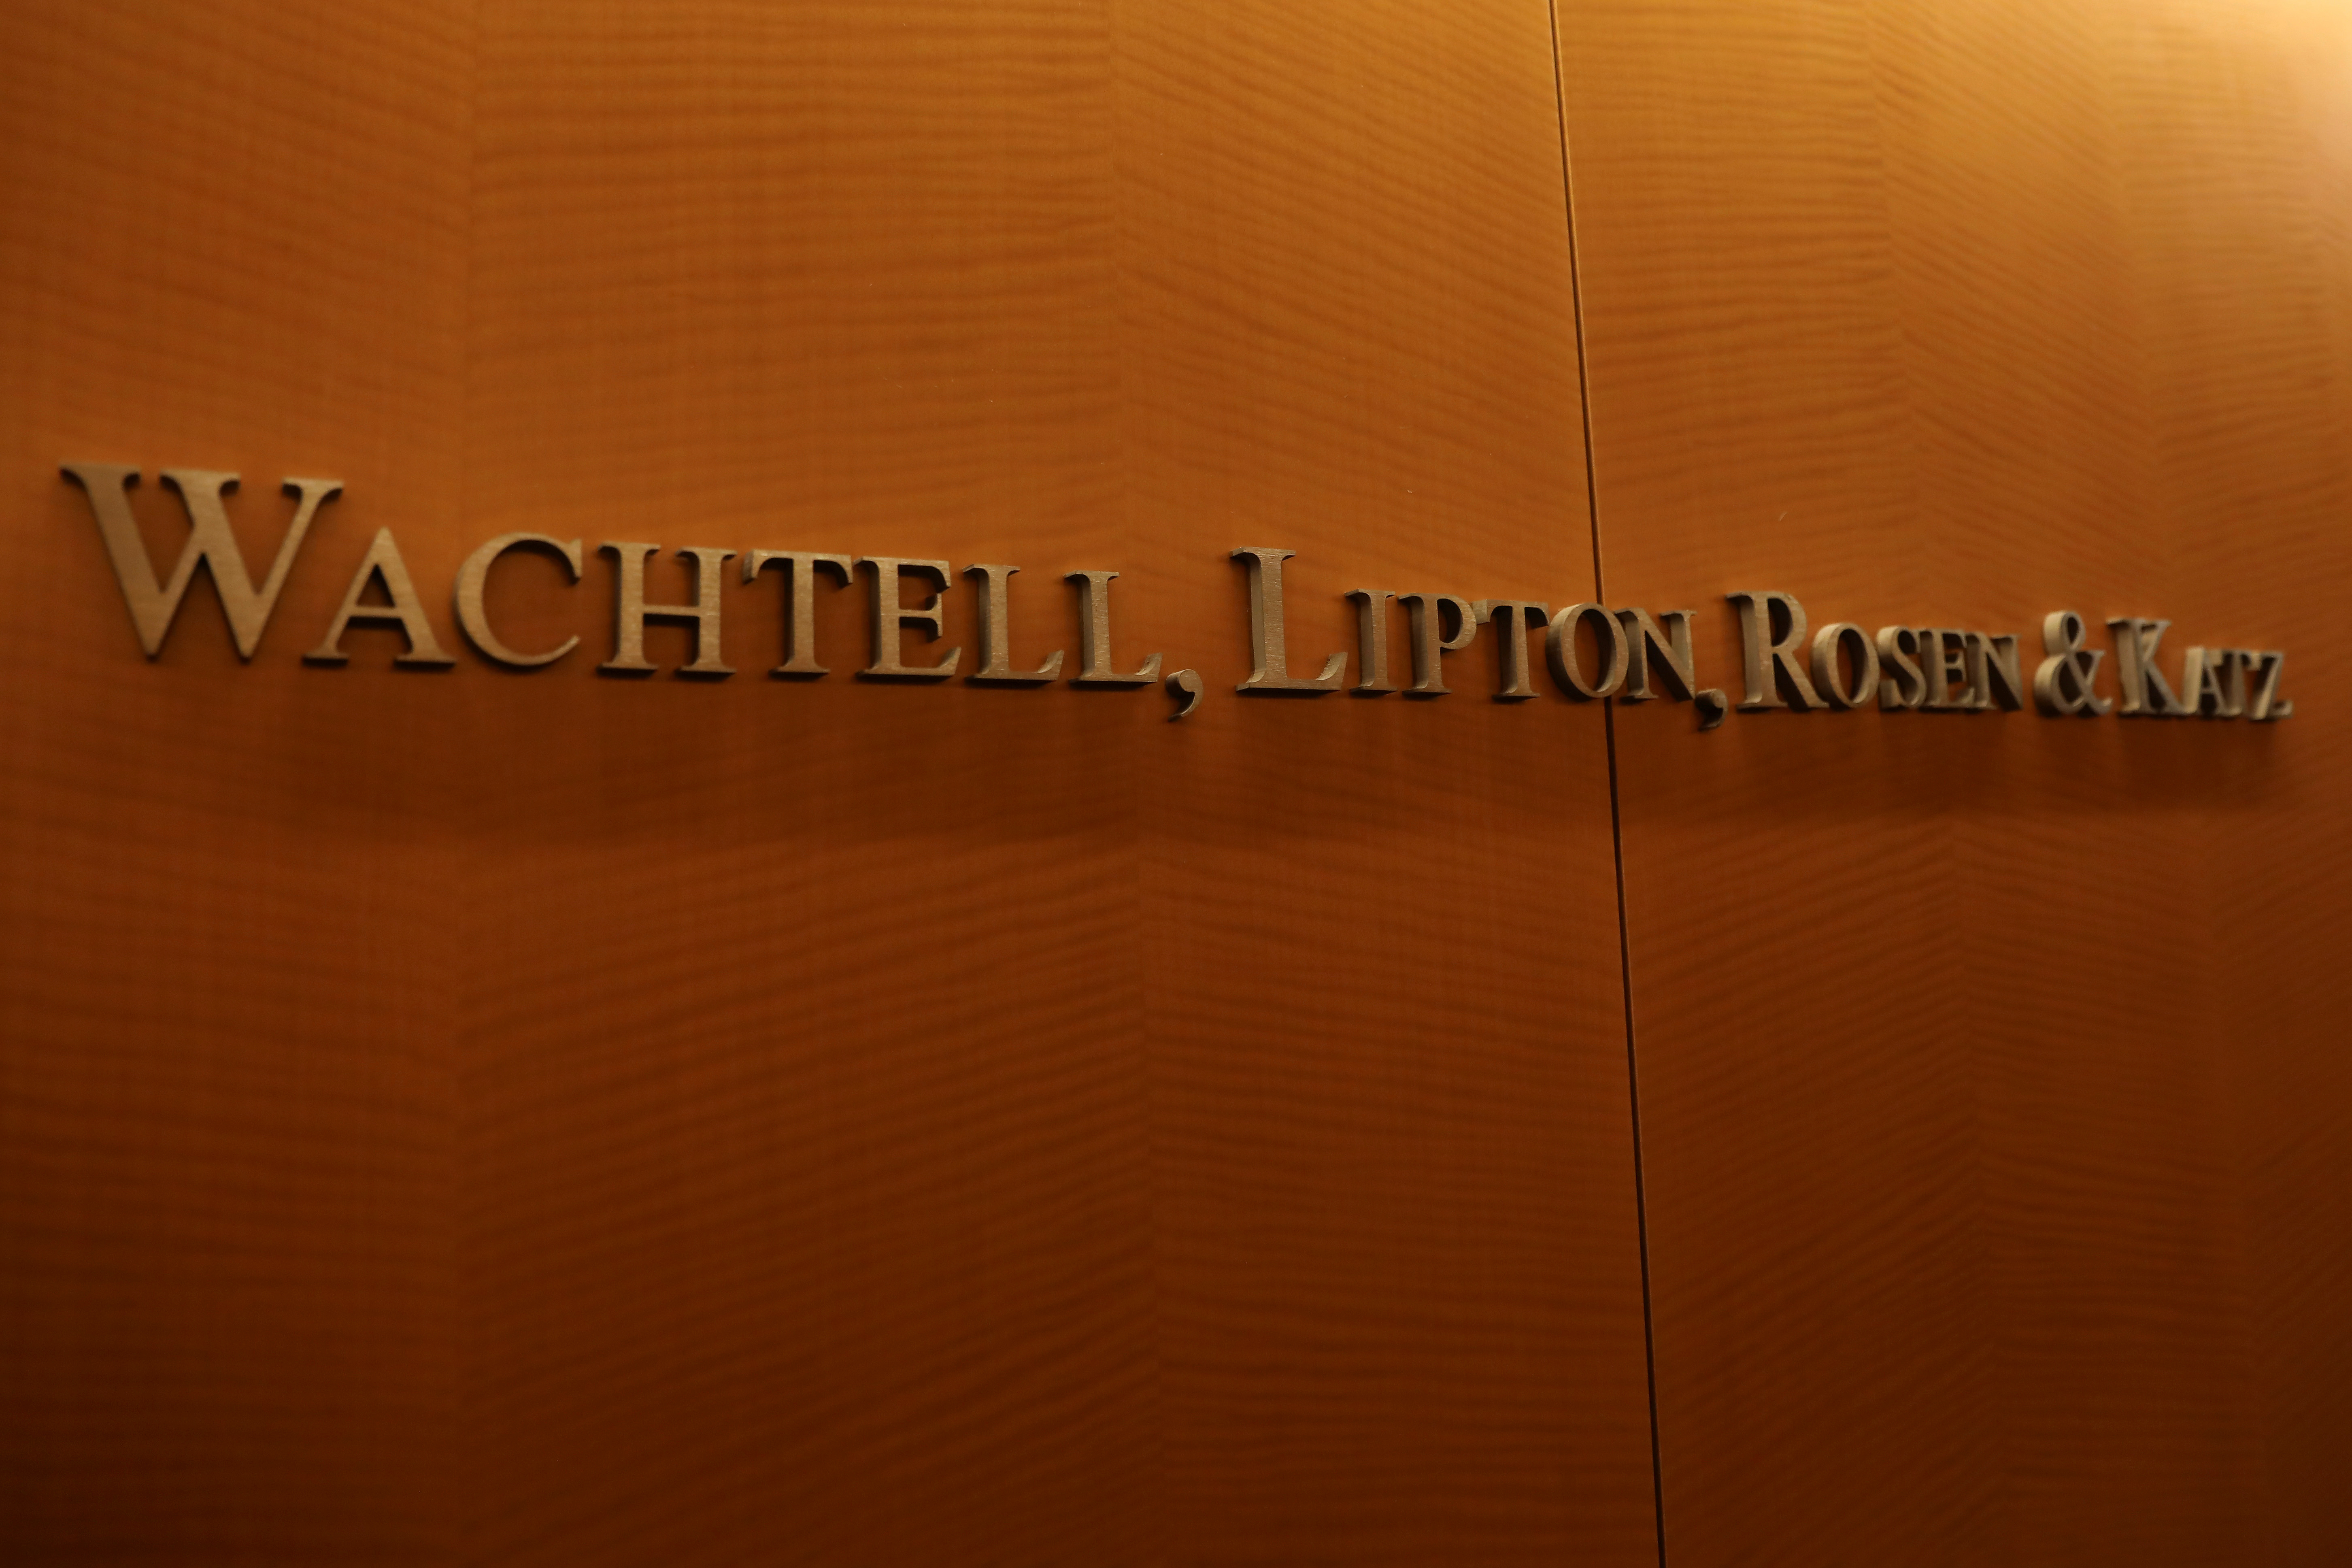 The logo for the Wachtell, Lipton, Rosen & Katz law firm is seen at their office in New York